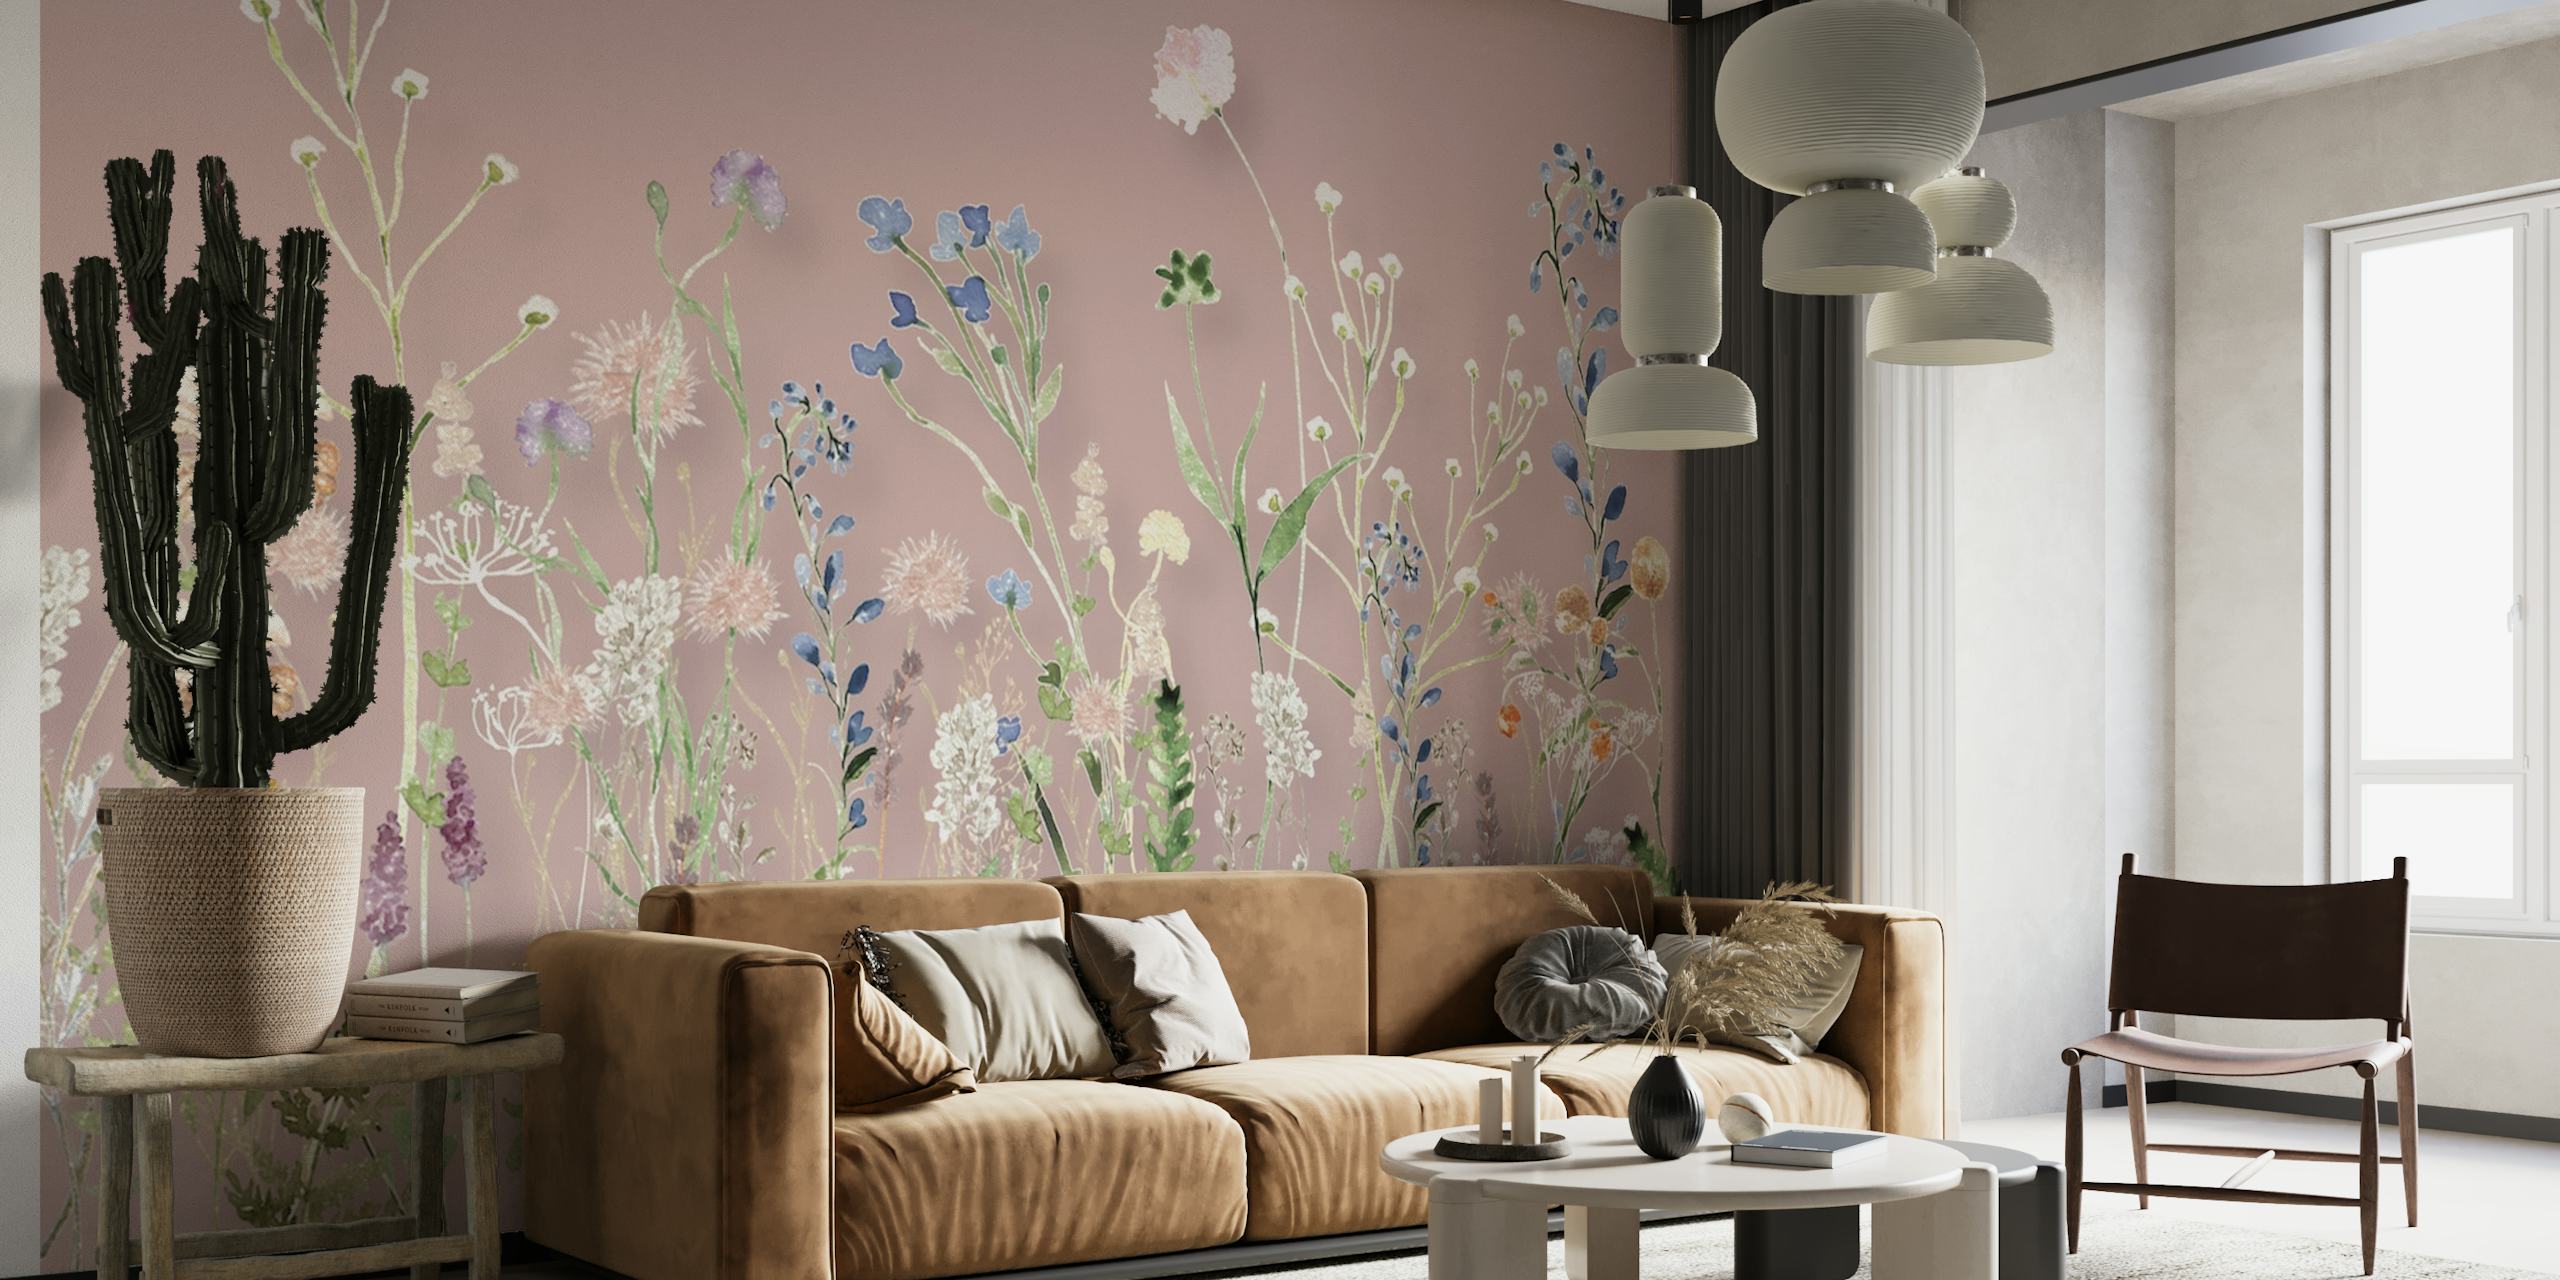 A soothing wildflower meadow design with a blush pink background for a wall mural.